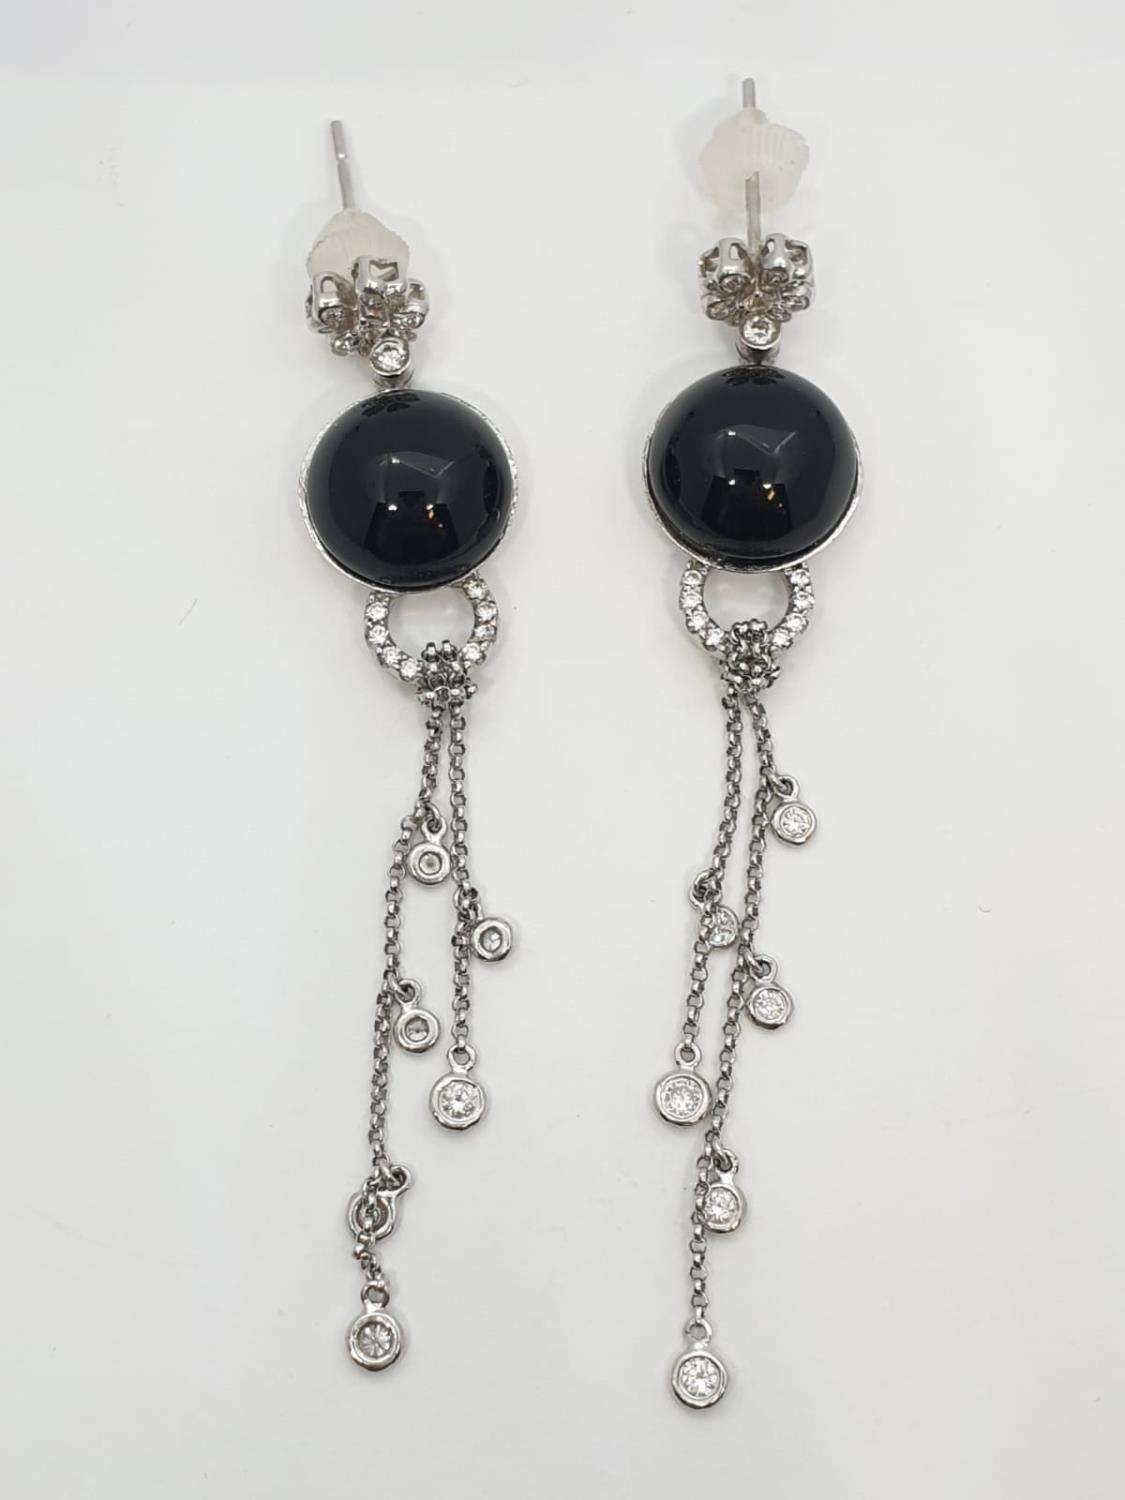 Pair of Onyx and diamond drop earrings set in 18ct gold, weight 10.13g and 7cm drop approx